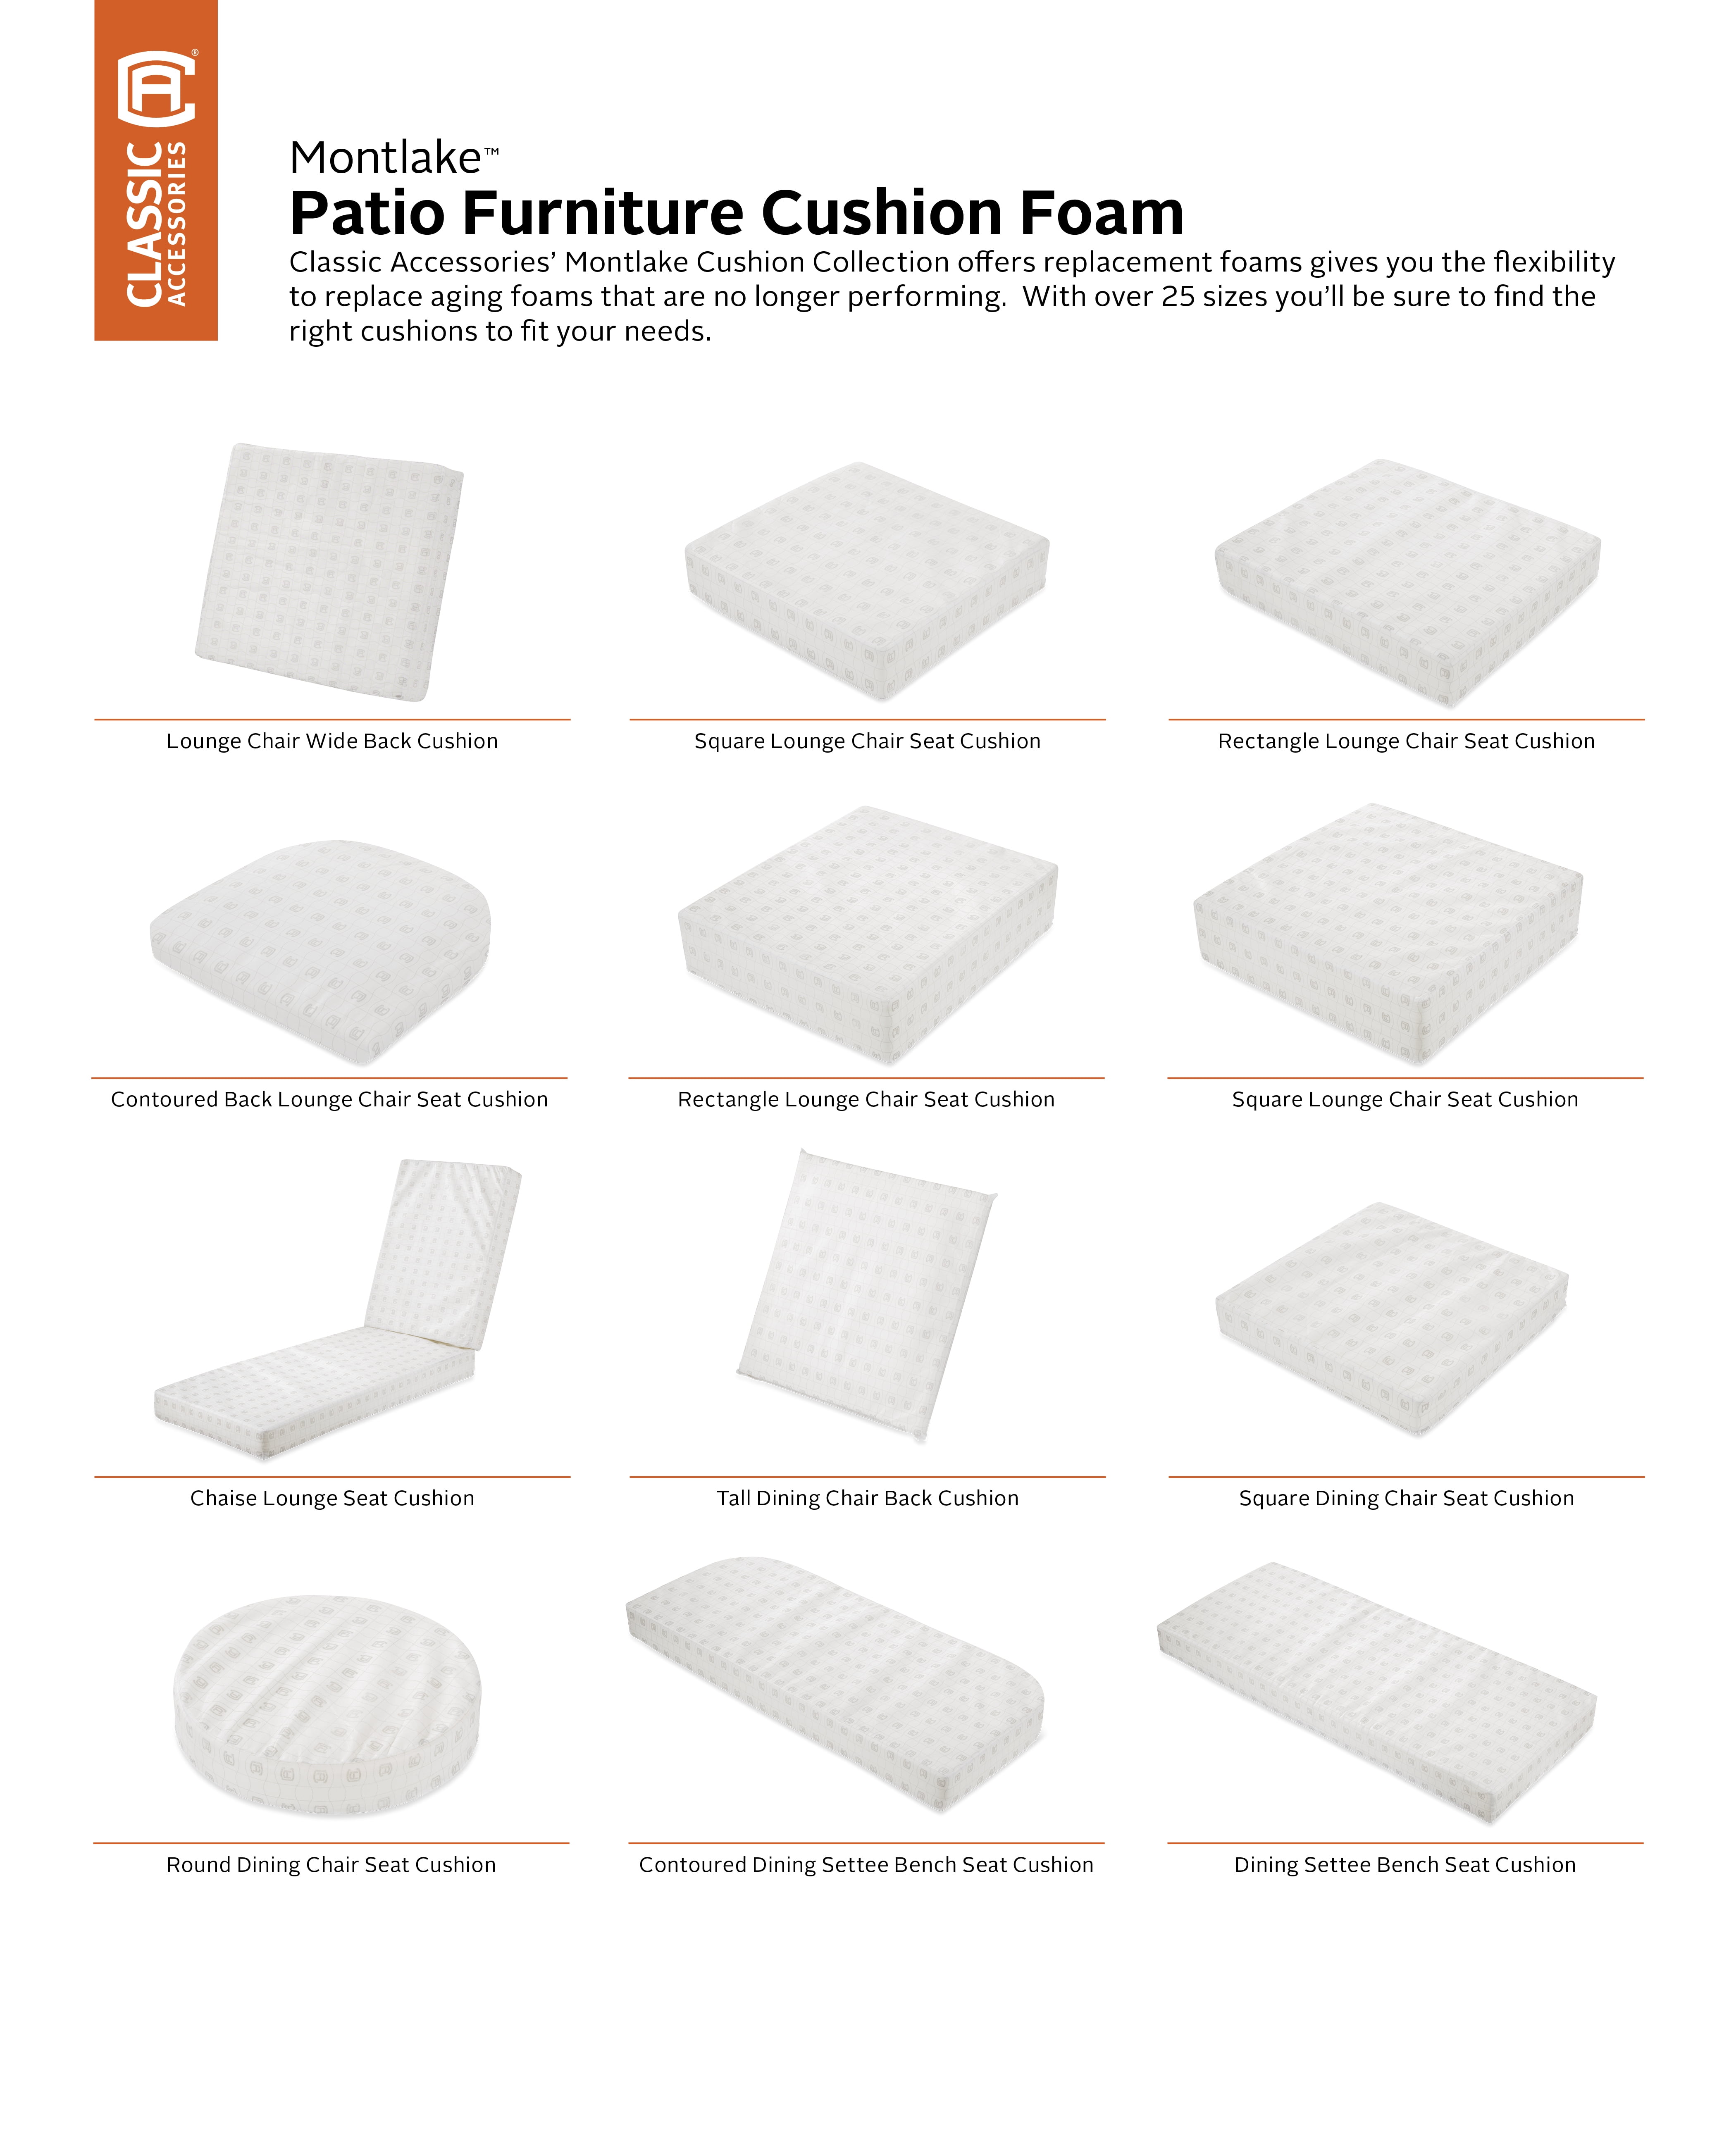 All About Cushion Foam Part 2: 5 Types of Outdoor Cushion Foam